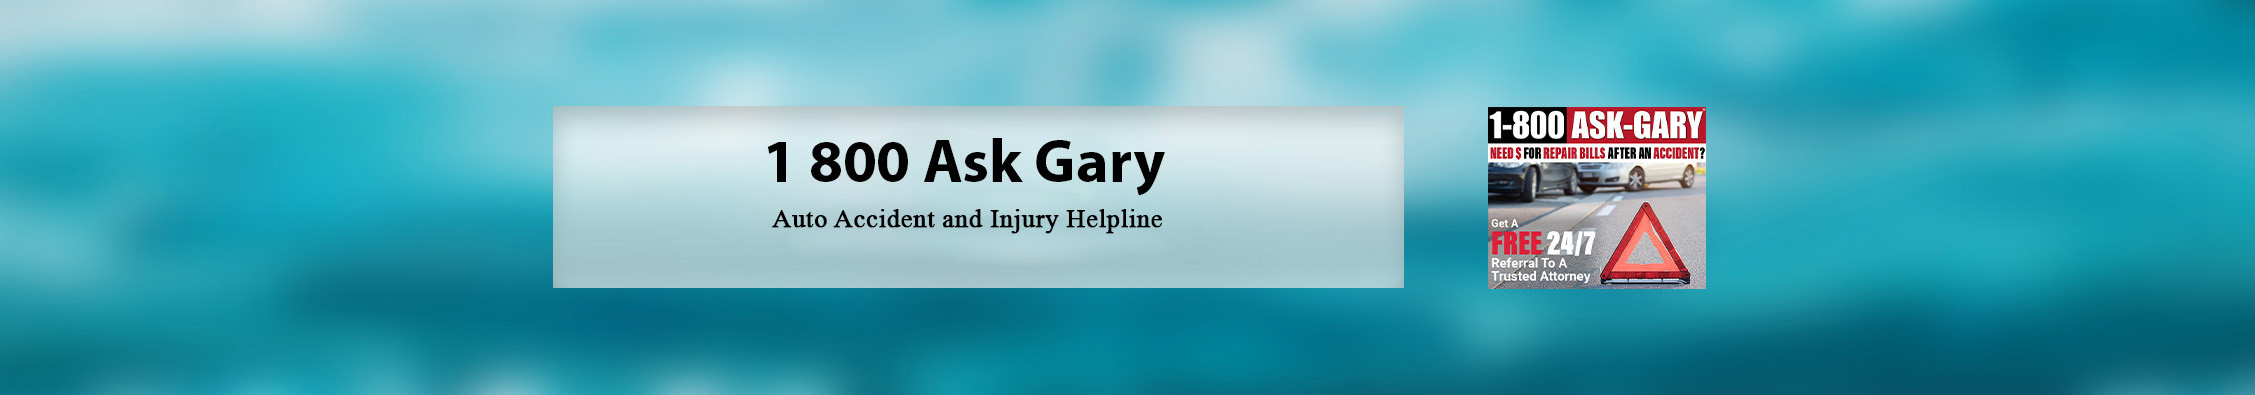 1-800 Ask Gary's profile banner